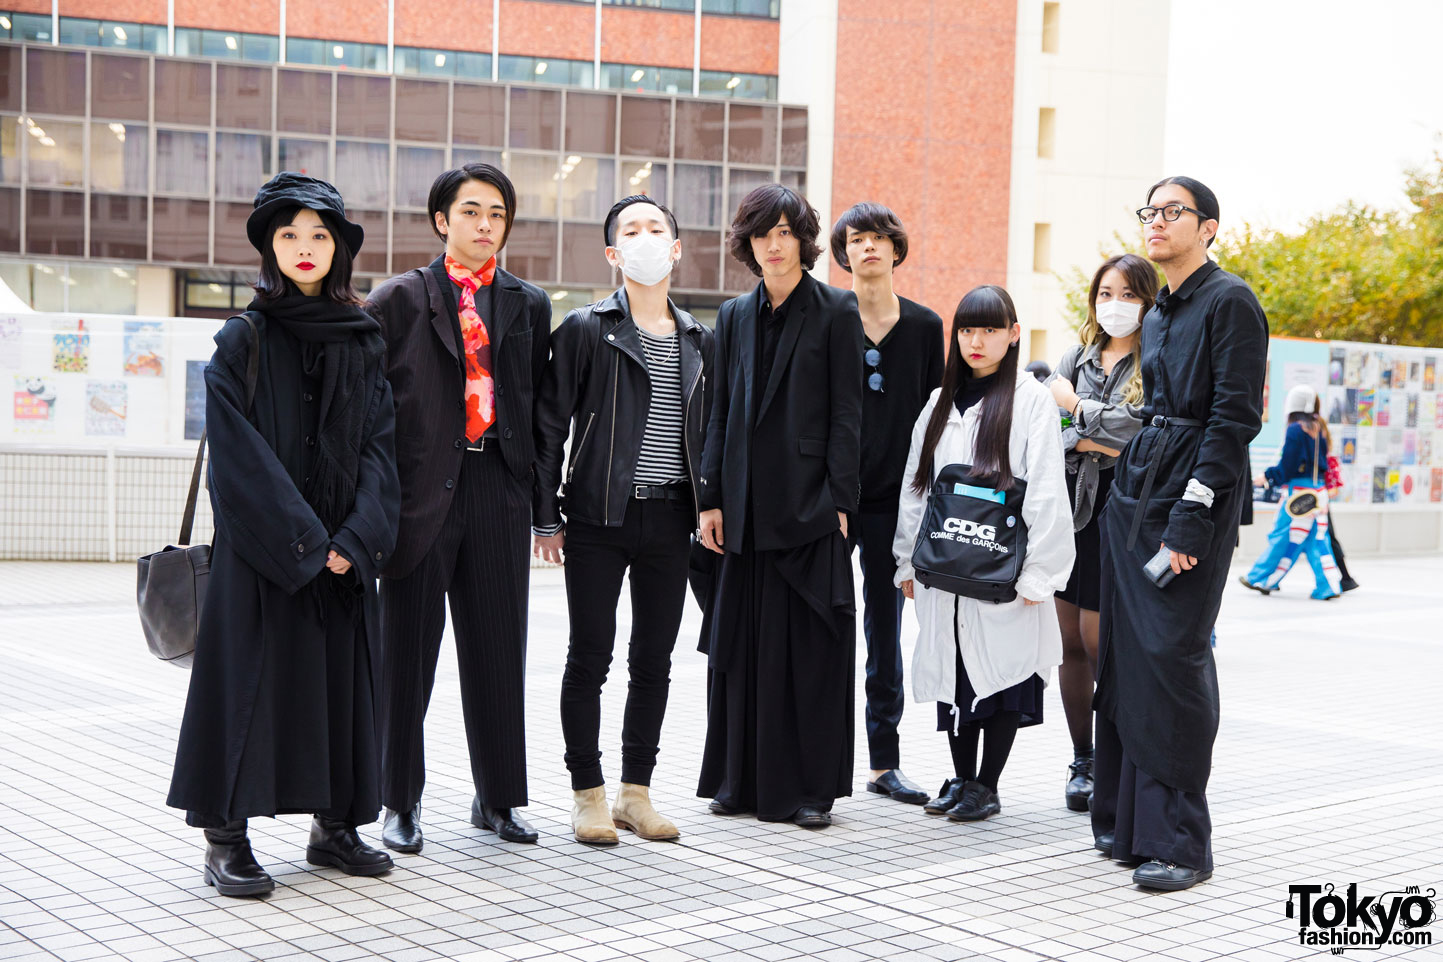 Bunka Fashion College Student Street Styles w/ Y's & Ann Demeulemeester Boots